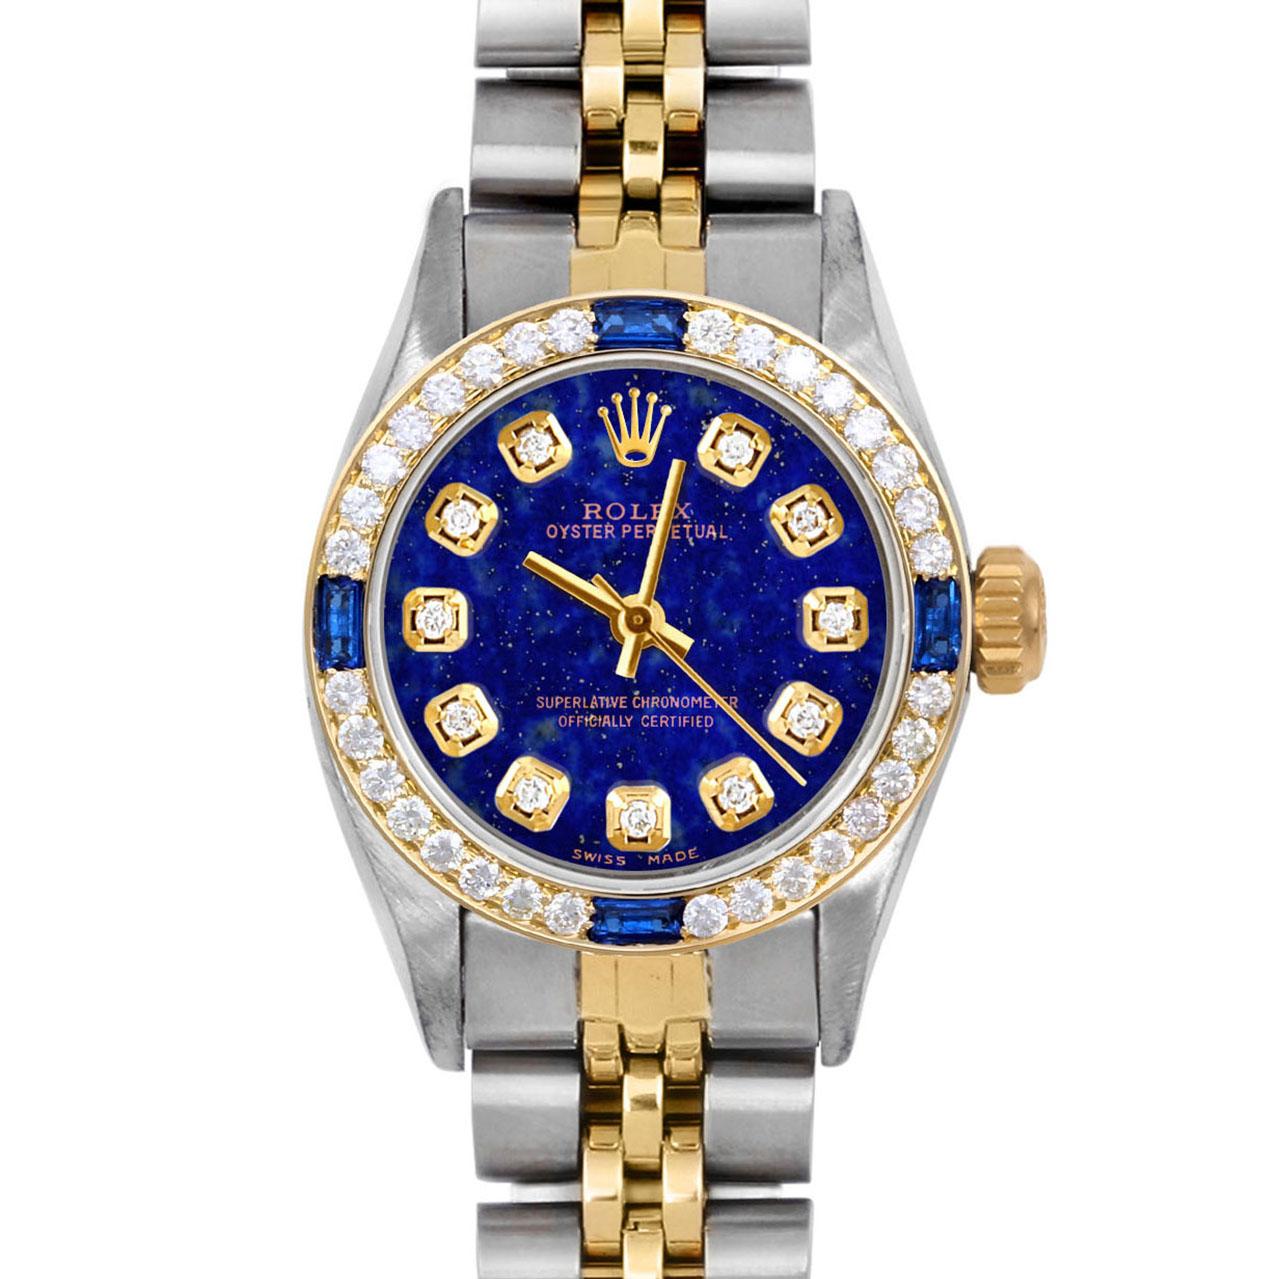 Brand : Rolex
Model : Oyster Perpetual 
Gender : Ladies
Metals : 14K Yellow Gold / Stainless Steel
Case Size : 24 mm

Dial : Custom Lapis Diamond Dial (This dial is not original Rolex And has been added aftermarket yet is a beautiful Custom